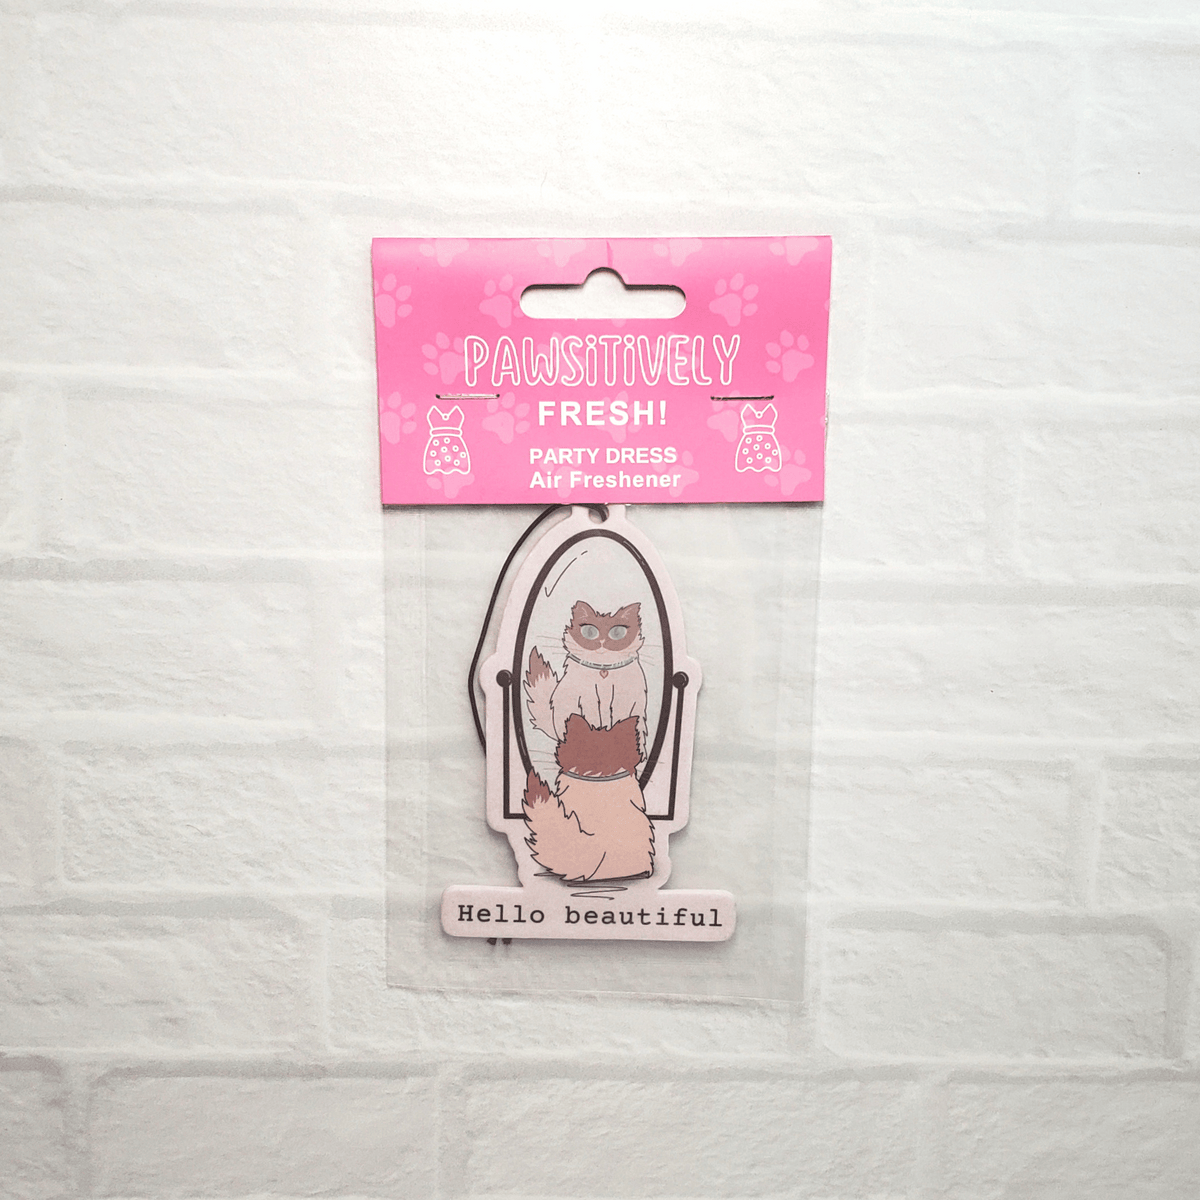 Pawsitively Fresh Air Freshener-Fiona/Party Dress Scent